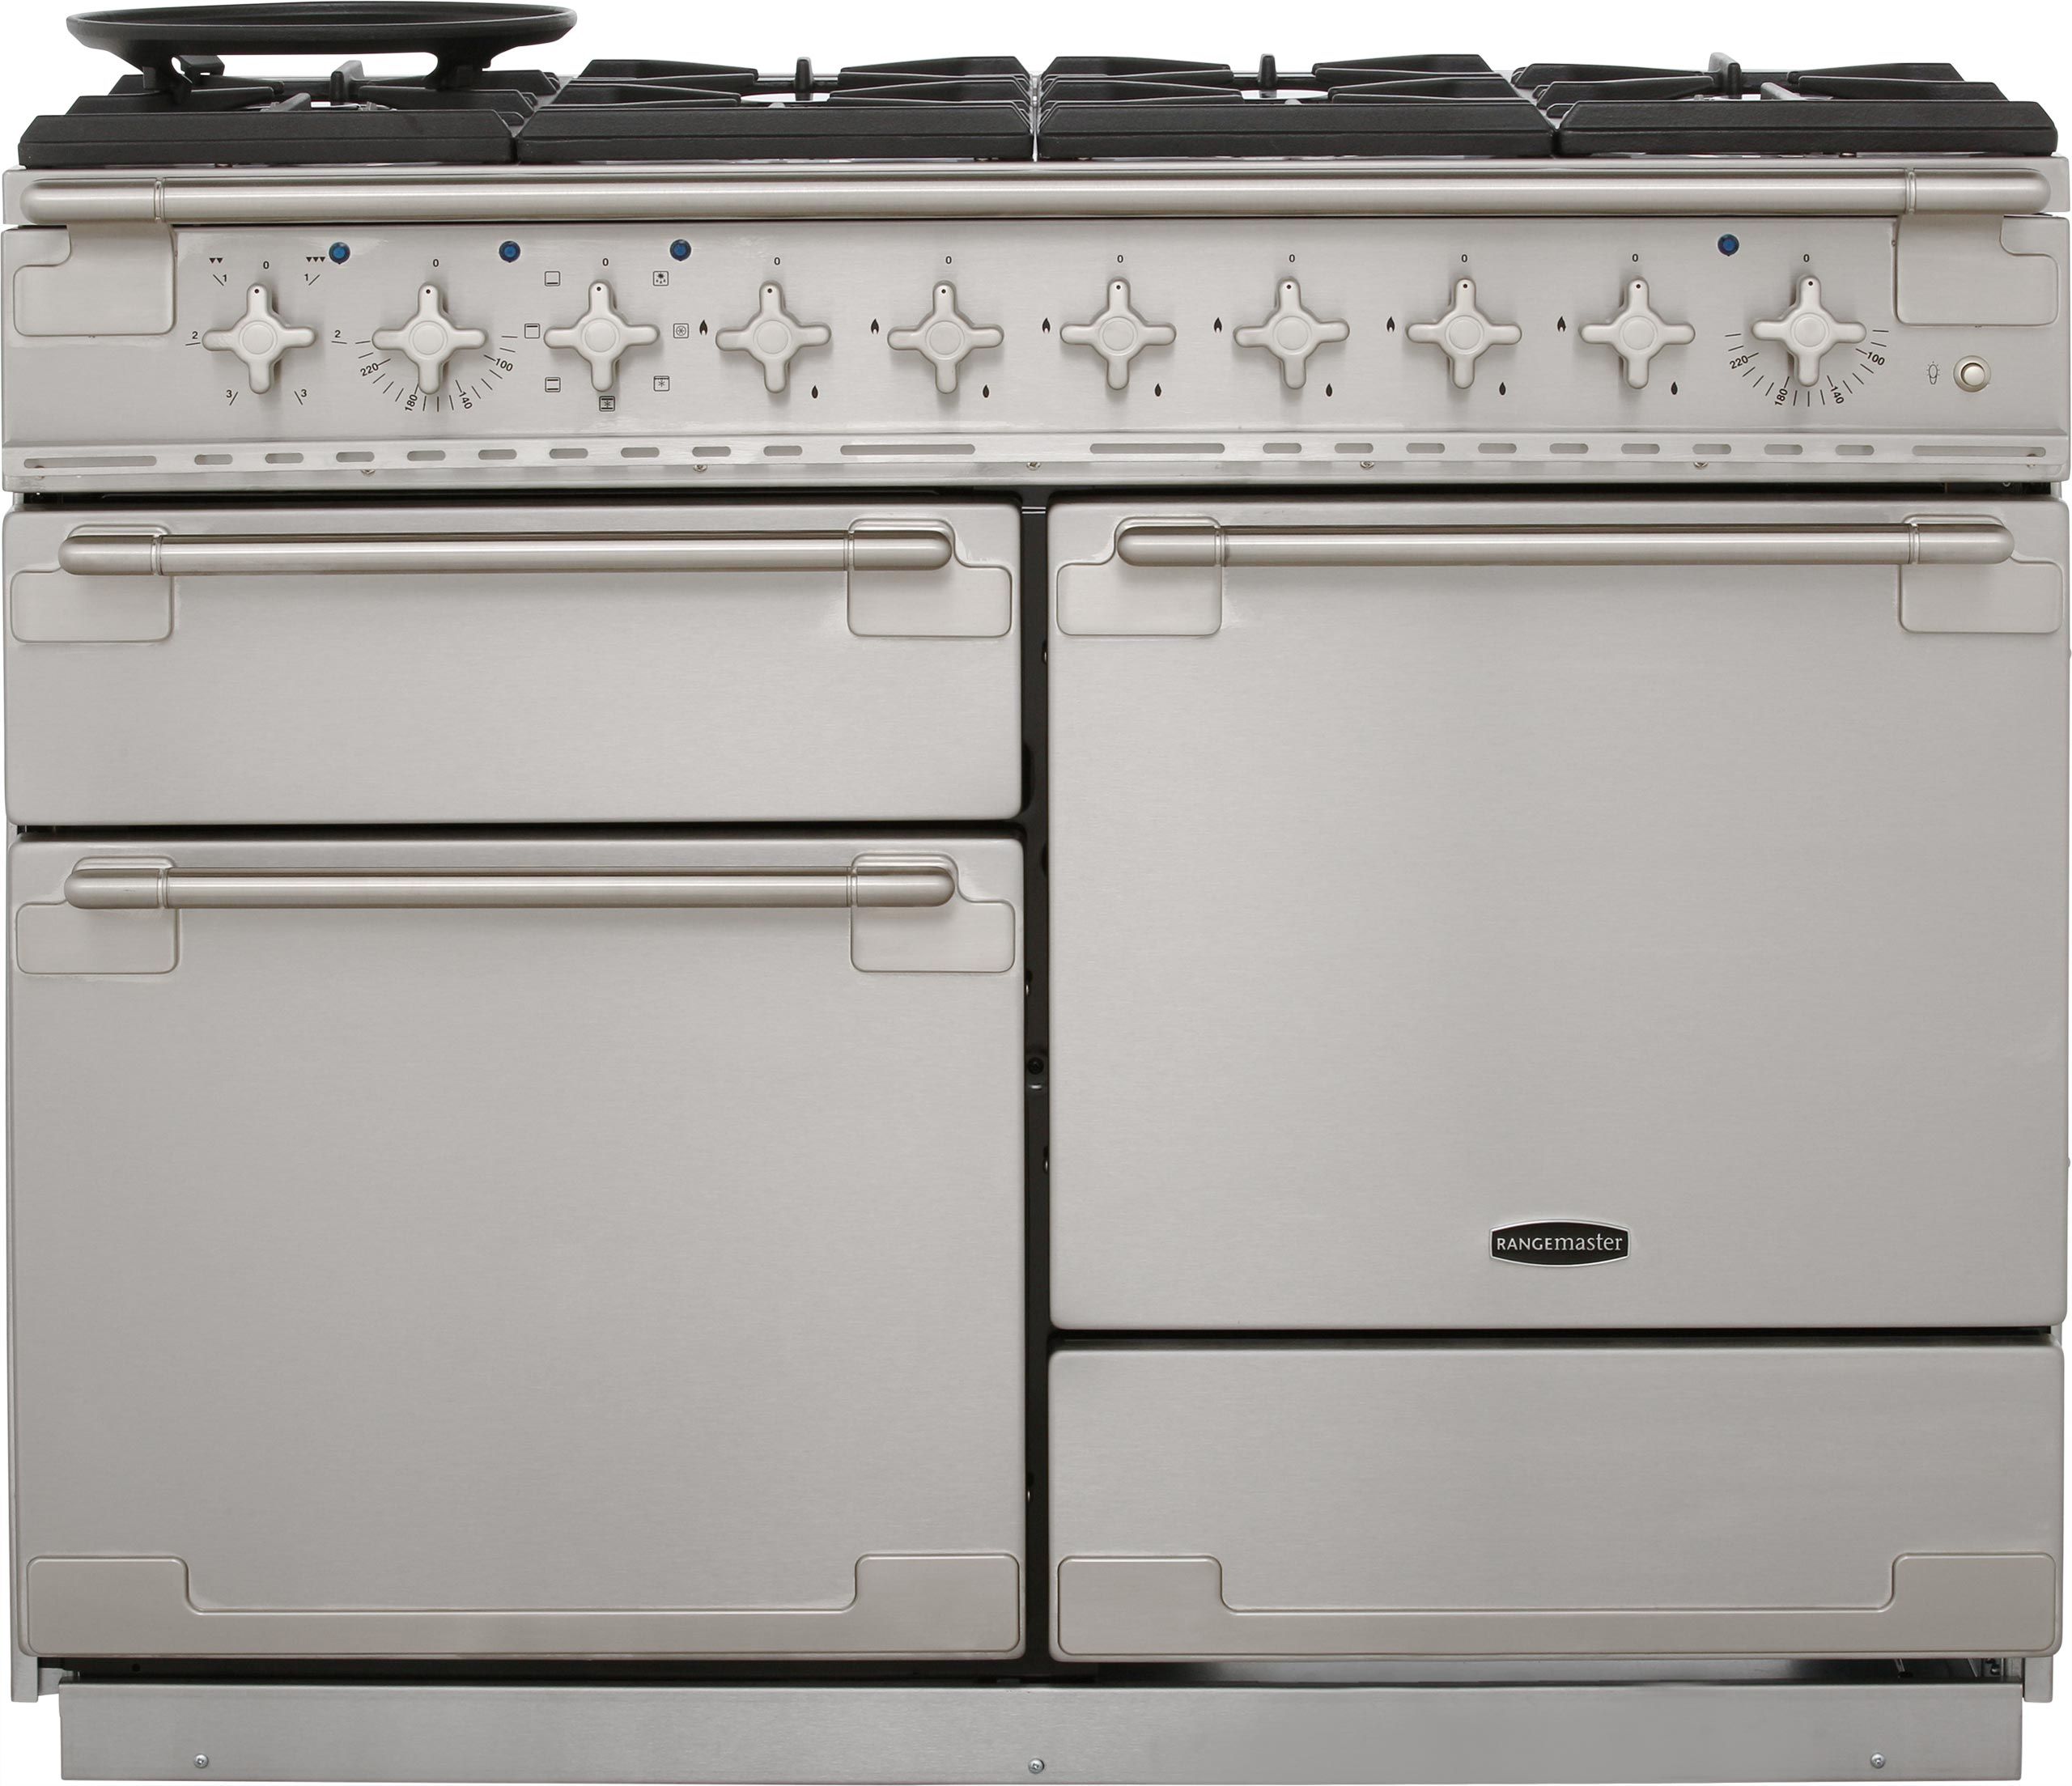 Rangemaster Elise ELS110DFFSS 110cm Dual Fuel Range Cooker - Stainless Steel - A/A Rated, Stainless Steel